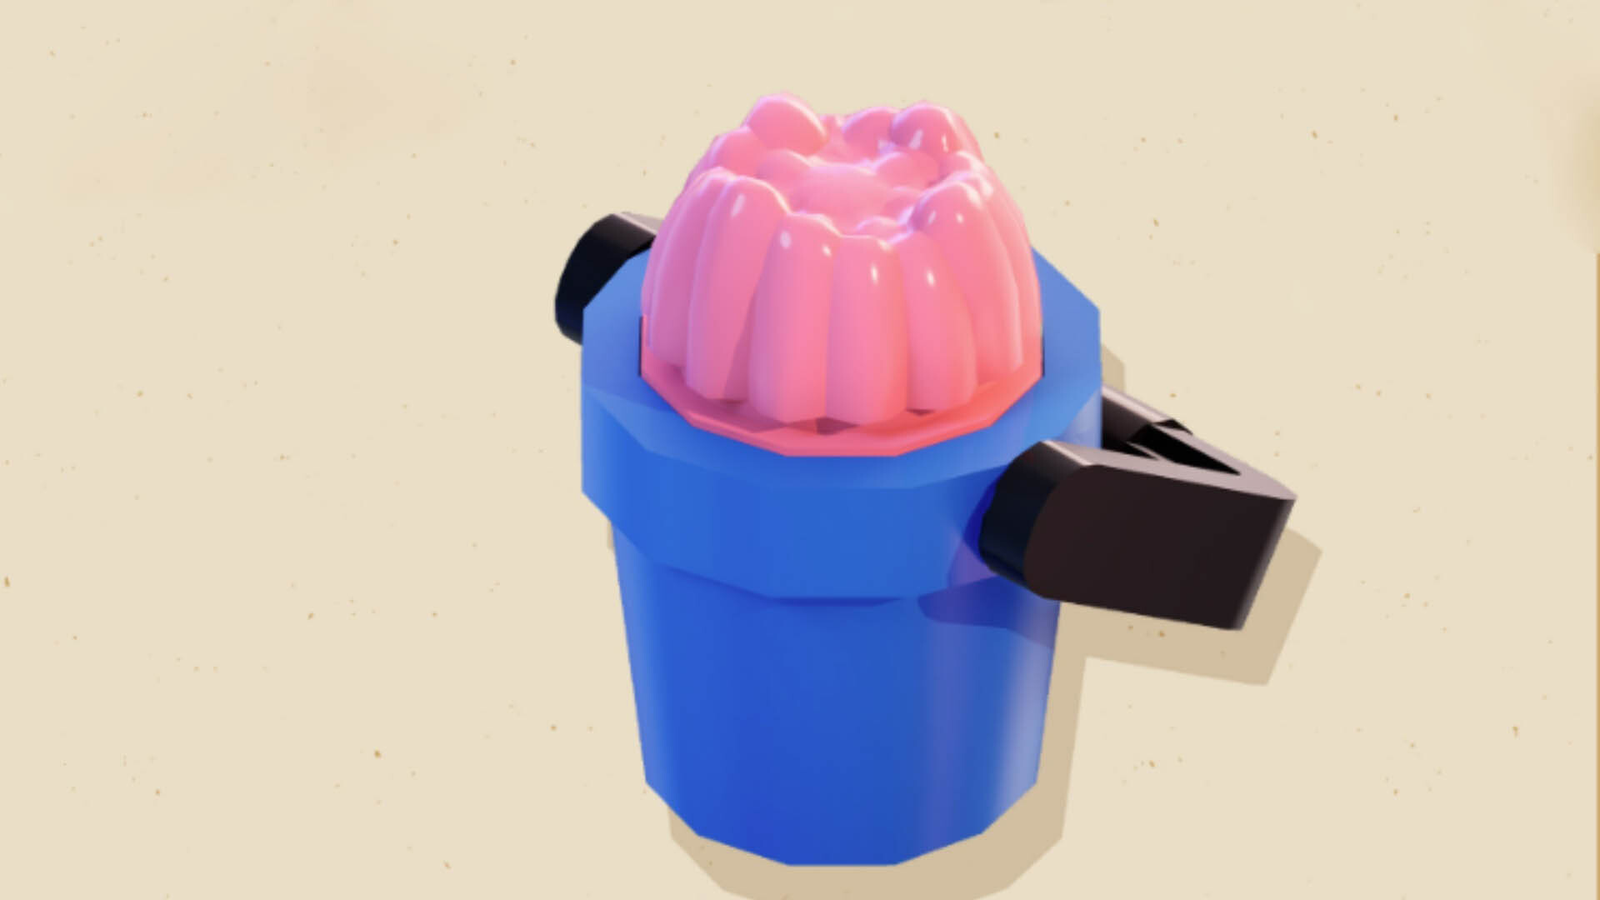 https://assetsio.gnwcdn.com/lego-fortnite-bait-bucket.jpg?width=1600&height=900&fit=crop&quality=100&format=png&enable=upscale&auto=webp